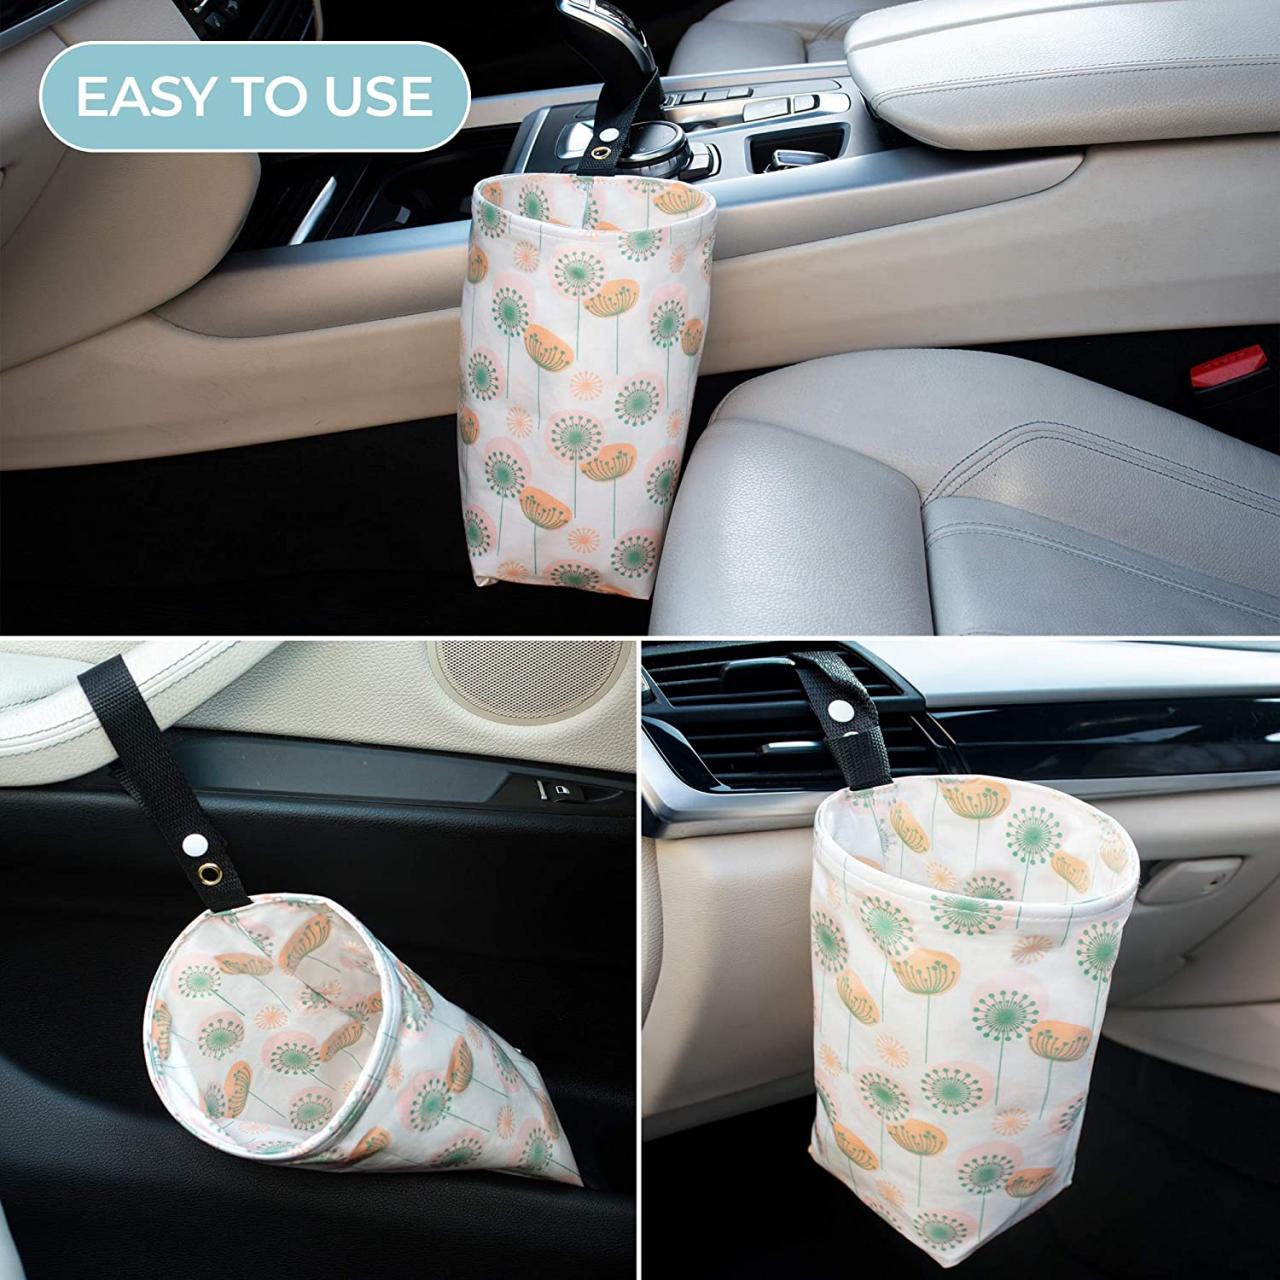 Buy Humble Bear's Car Trash Can Cute & Portable - Waterproof Car Trash Bin  , Multipurpose Car Garbage Bag Will Compliment The Rest of Your Car Decor ,  Usable for Front Seat ,